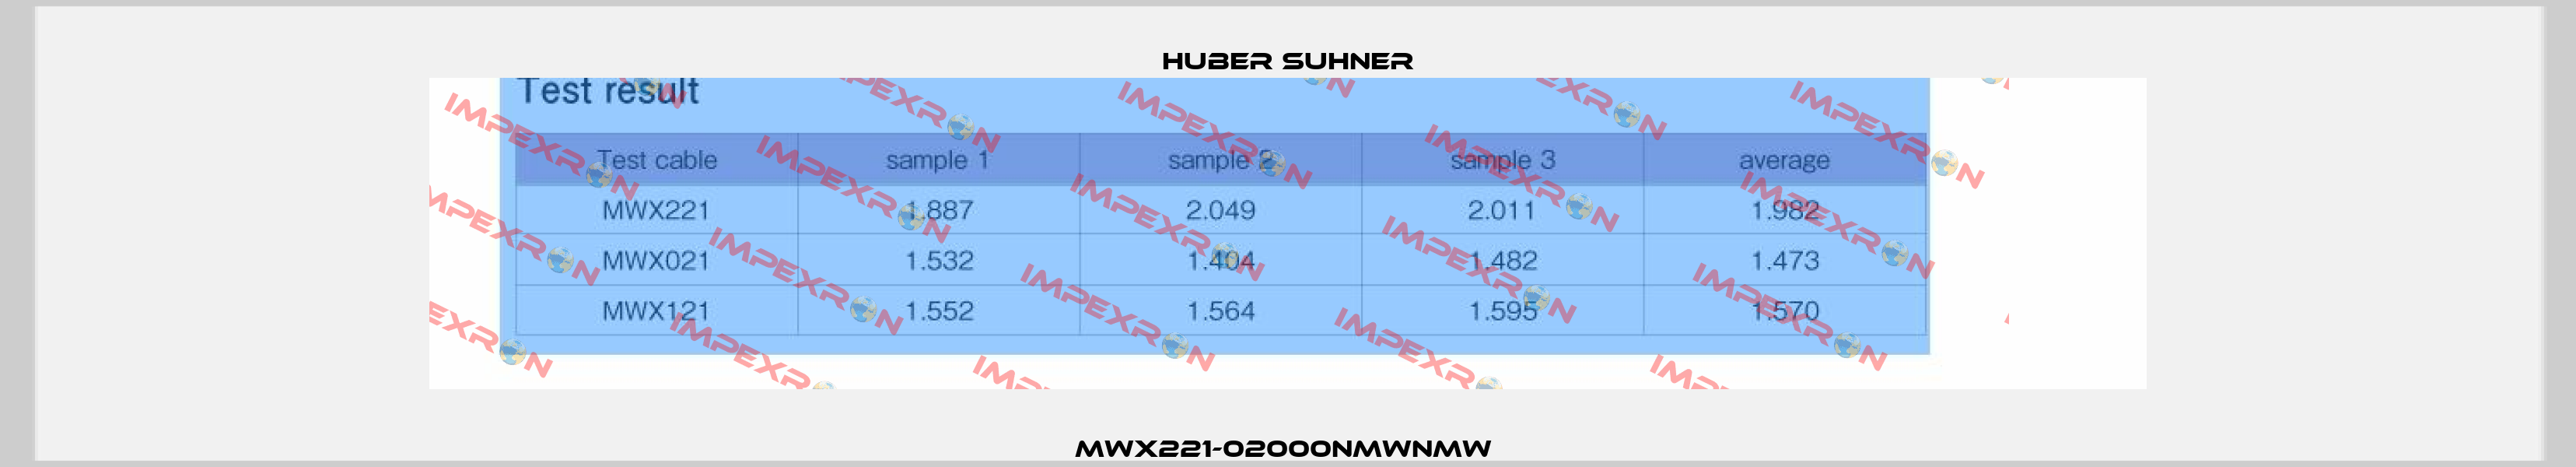 MWX221-02000NMWNMW  Huber Suhner